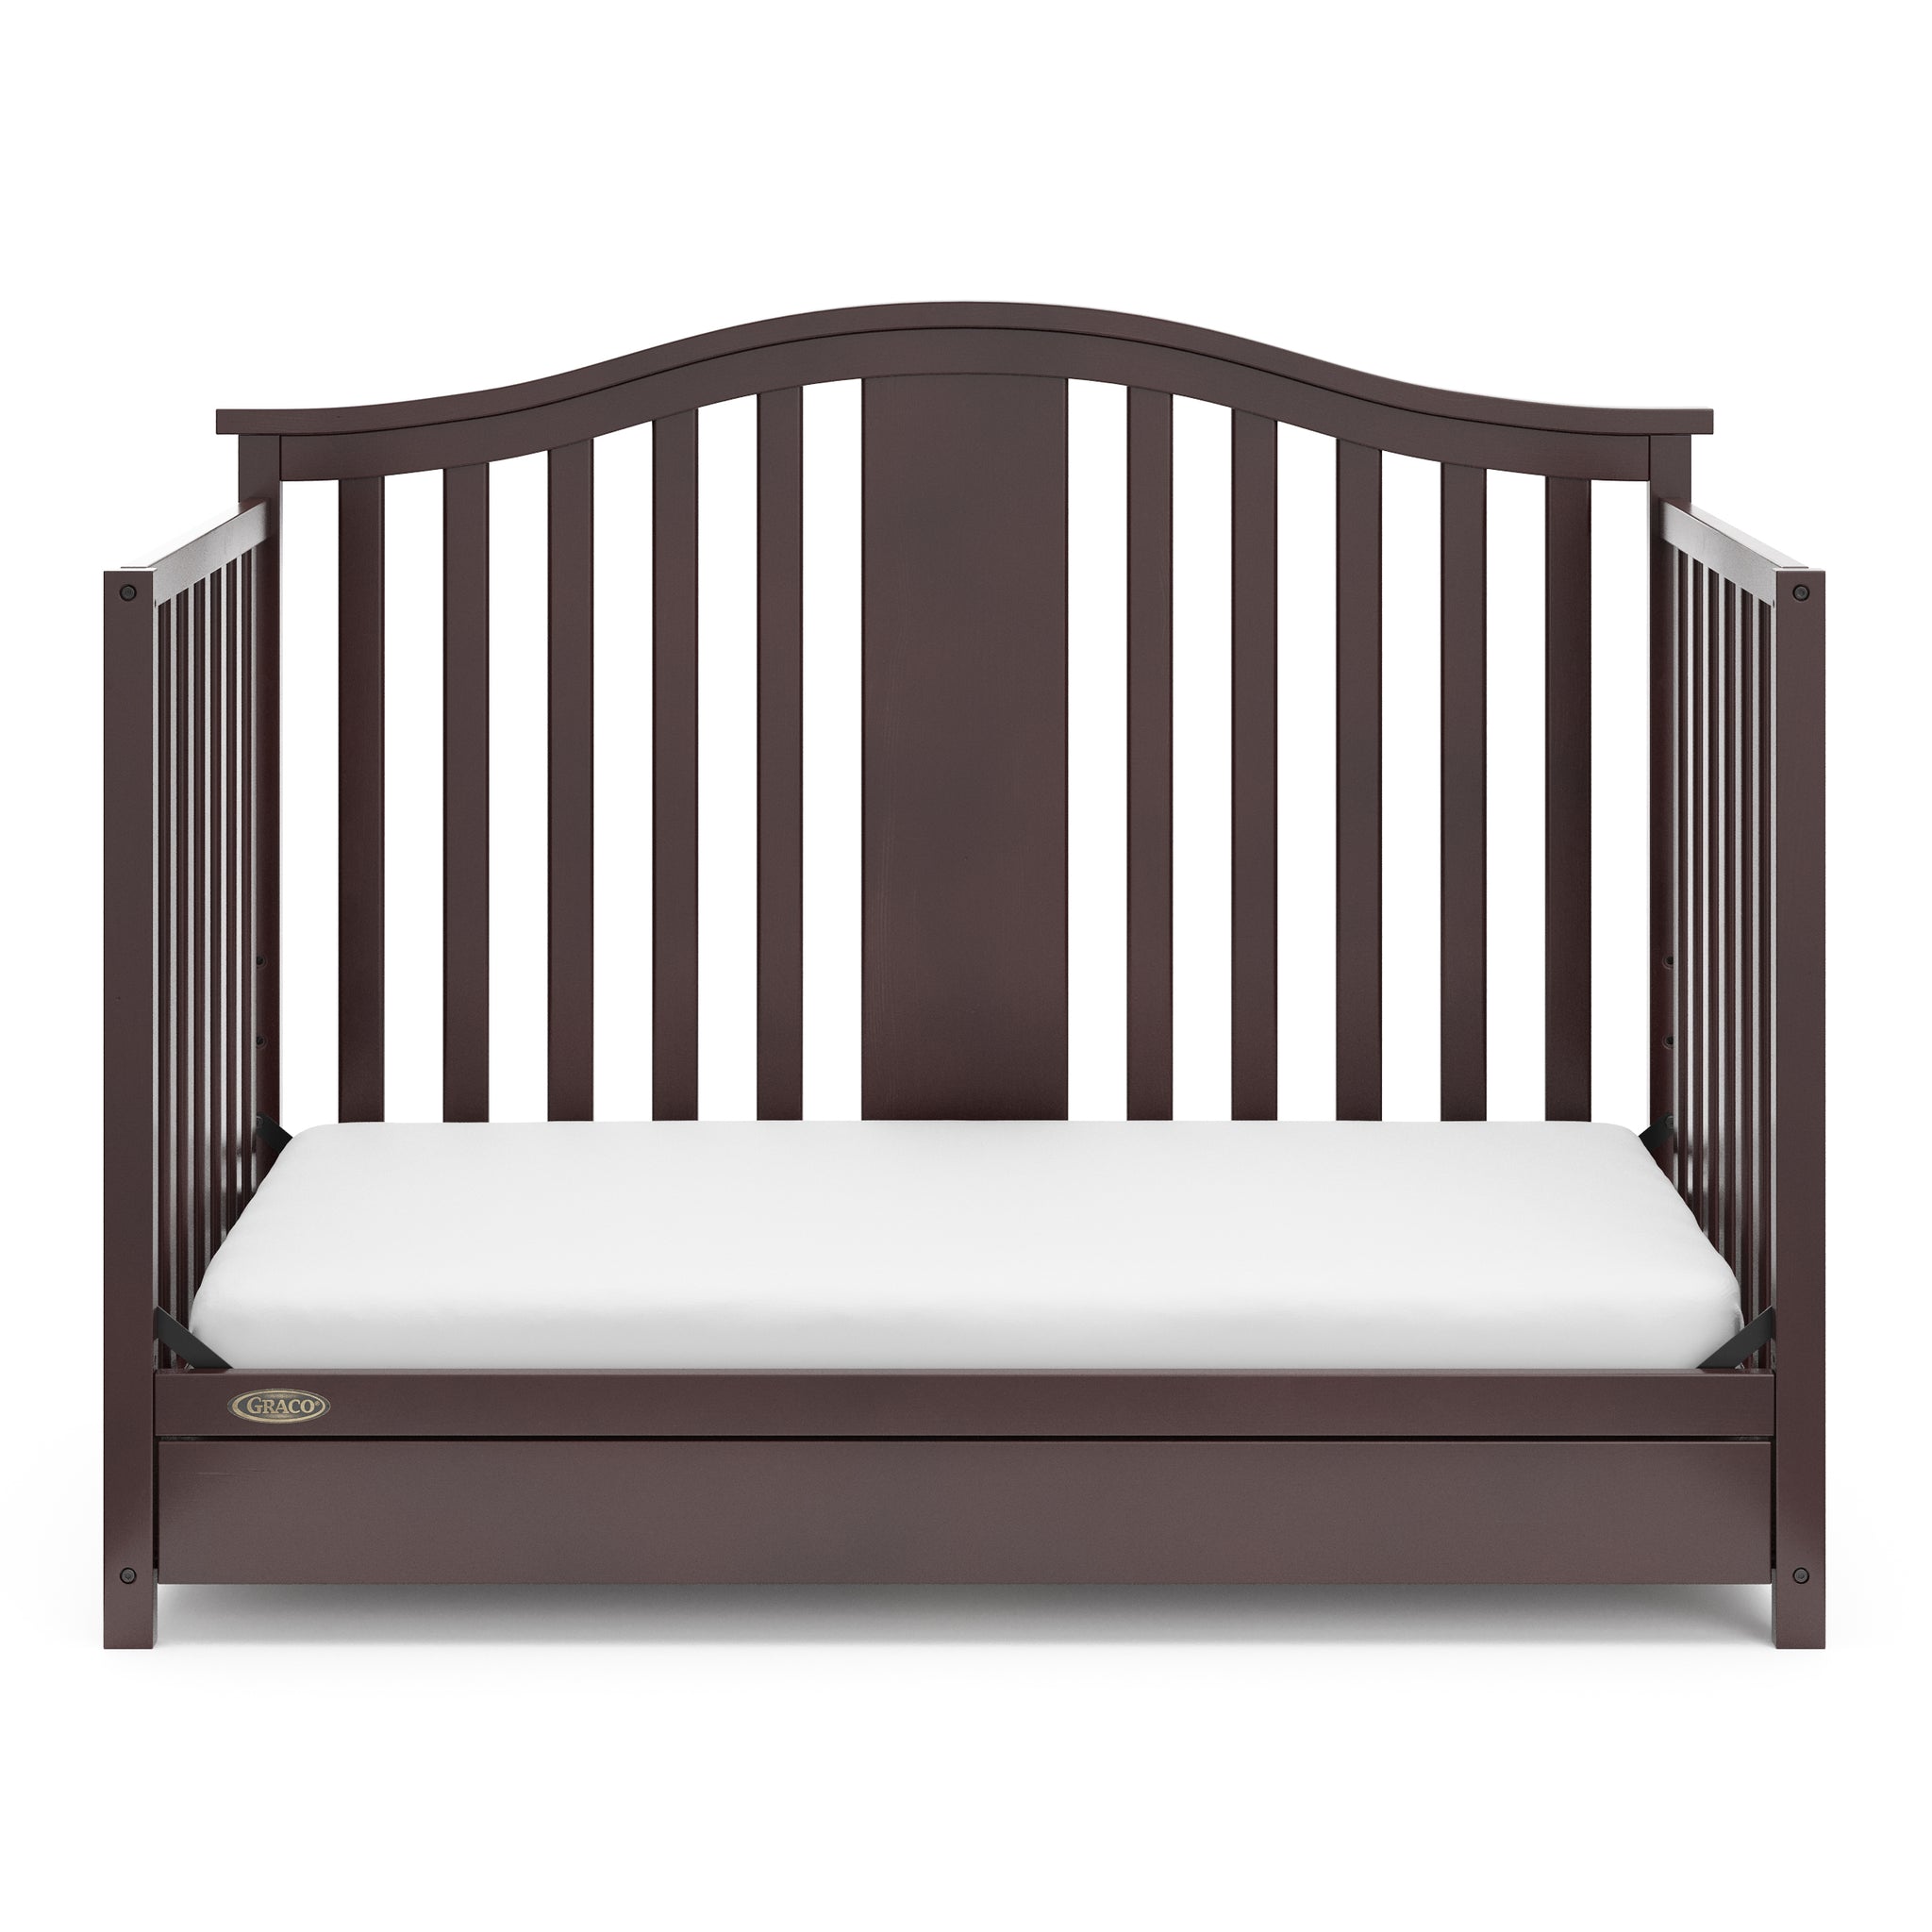 espresso crib with drawer in toddler bed conversion